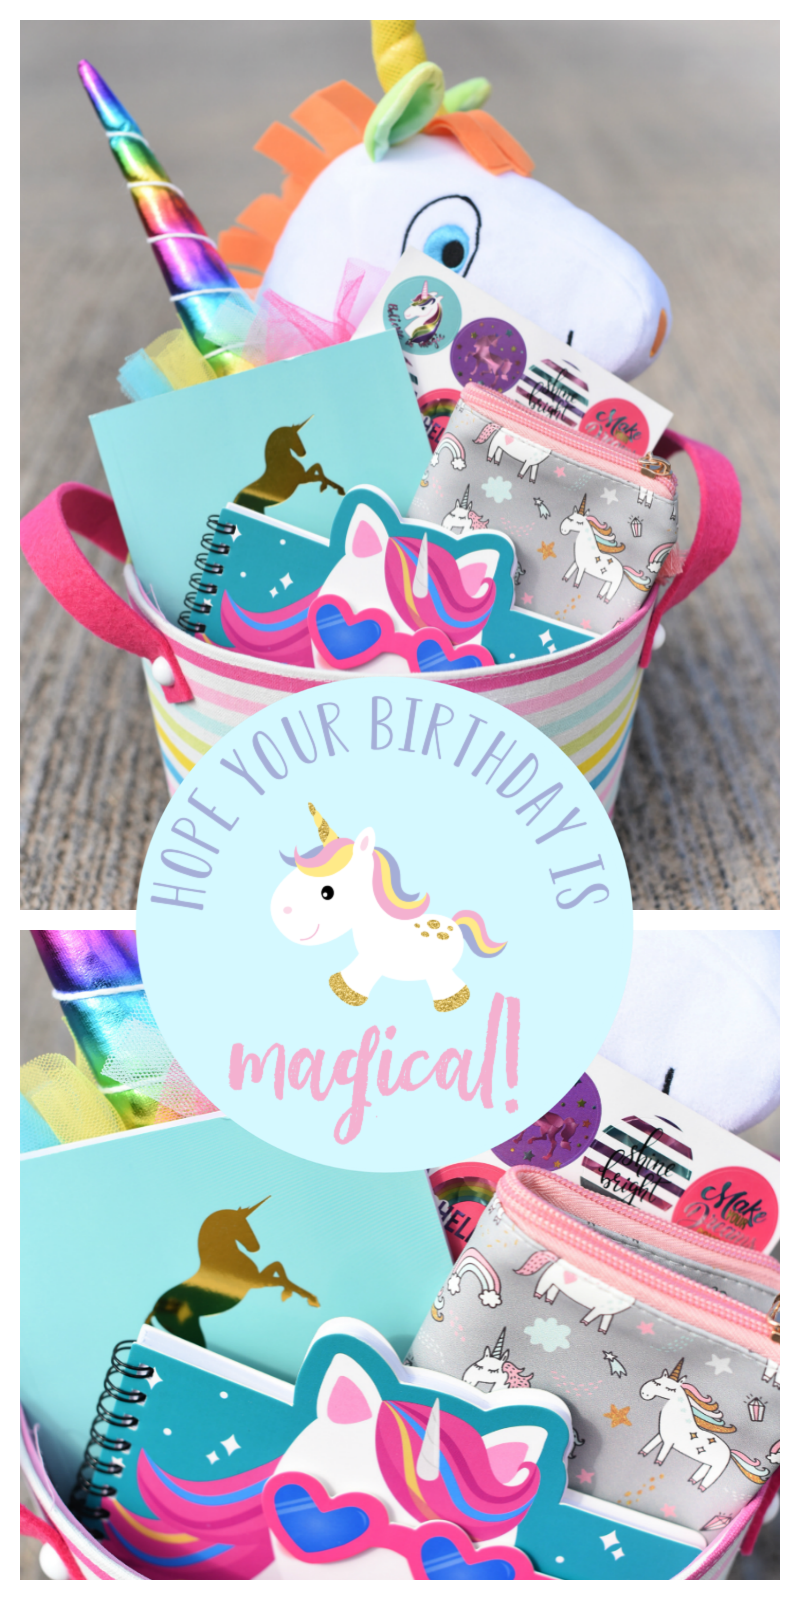 Unicorn Birthday Gifts-This fun unicorn birthday gift idea is perfect for any unicorn lover in your life! Fill a gift basket with fun unicorn themed items and add this cute "magical" tag for a great birthday gift for friends or little girls! #birthday #unicorn #unicorns #birthdaygifts